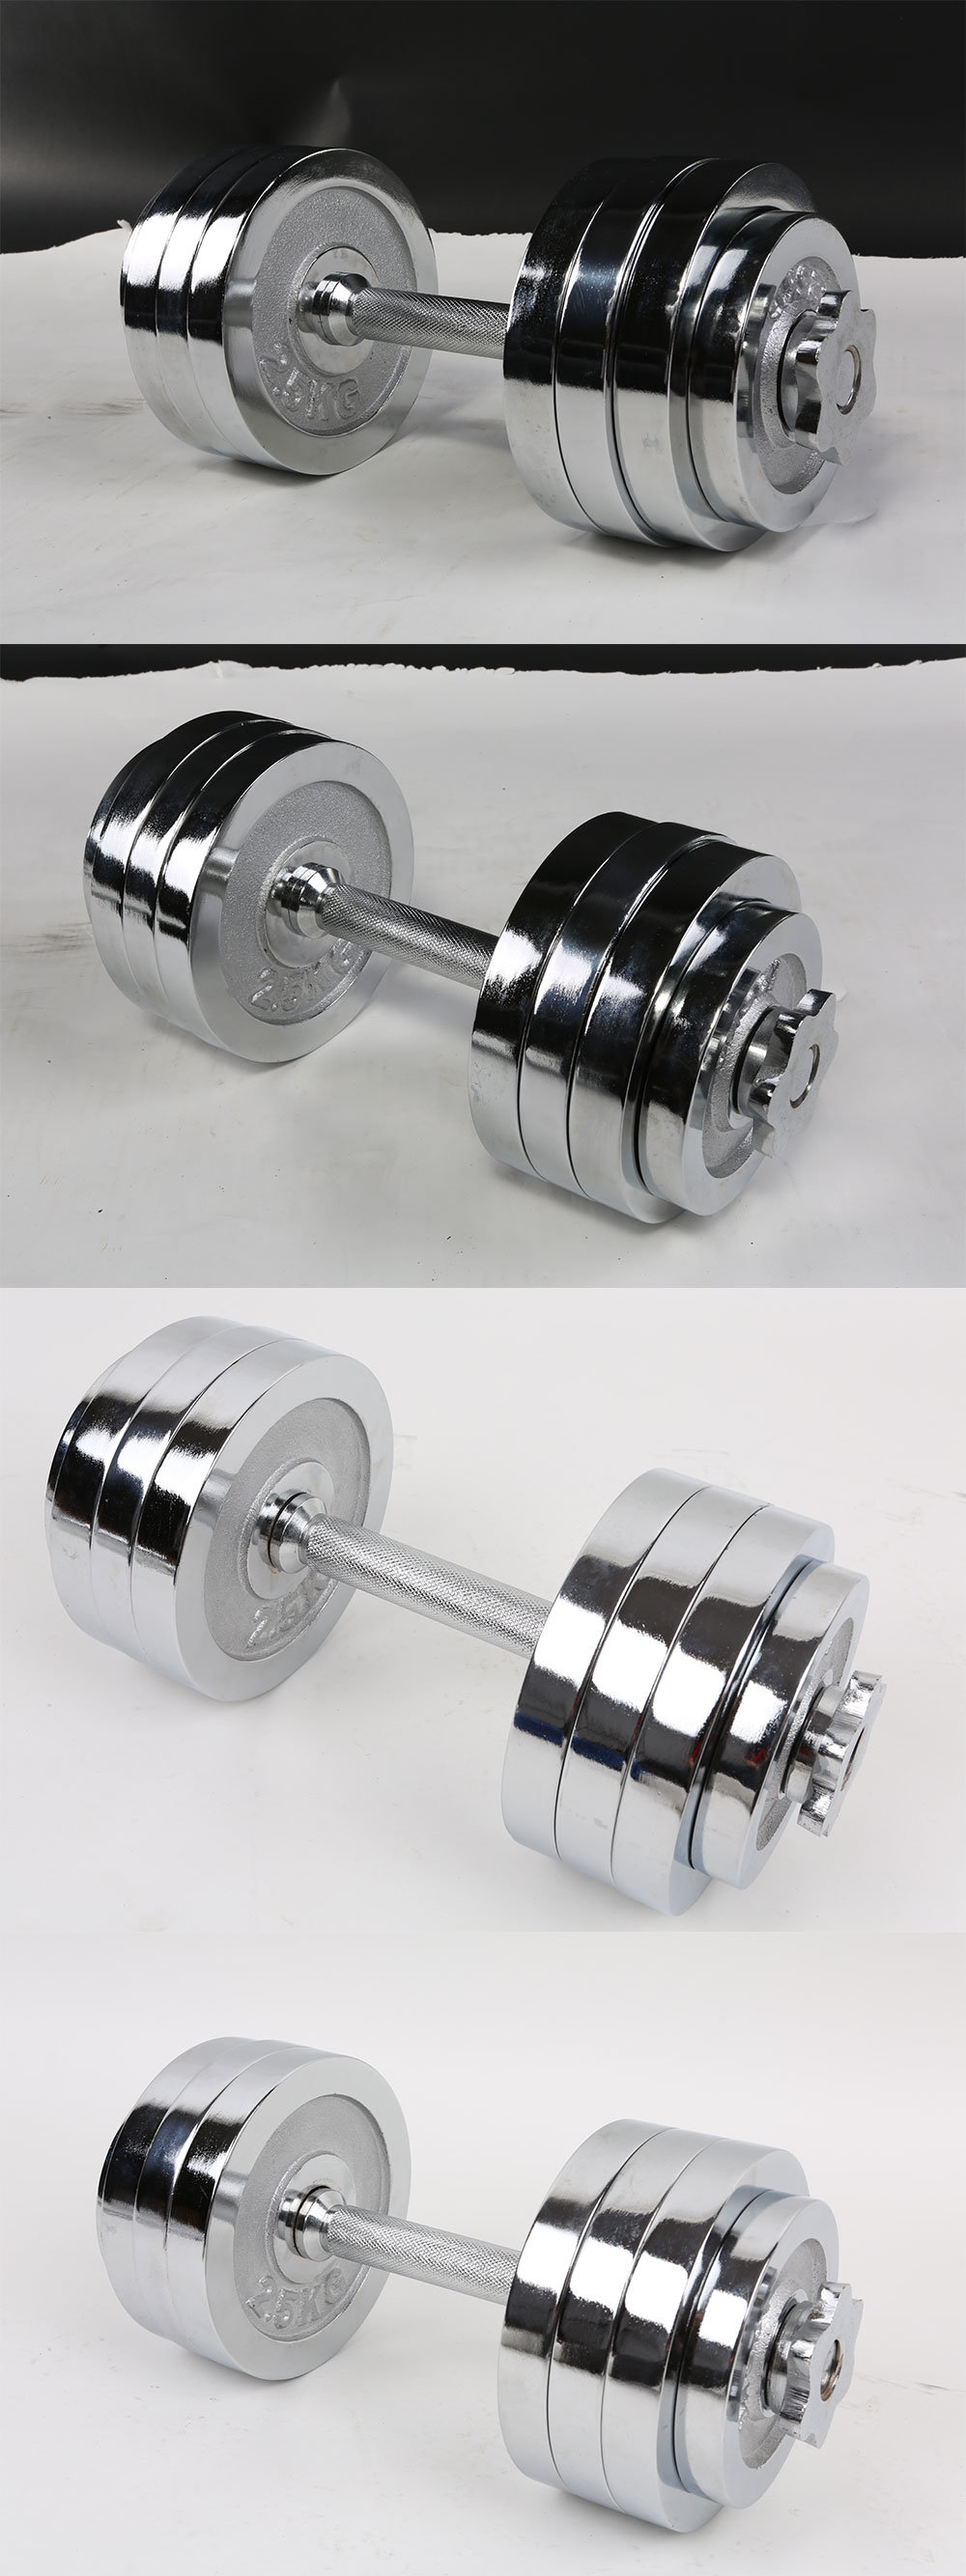 20kg Chromed Dumbbell Sets for Home Workouts and Fitness